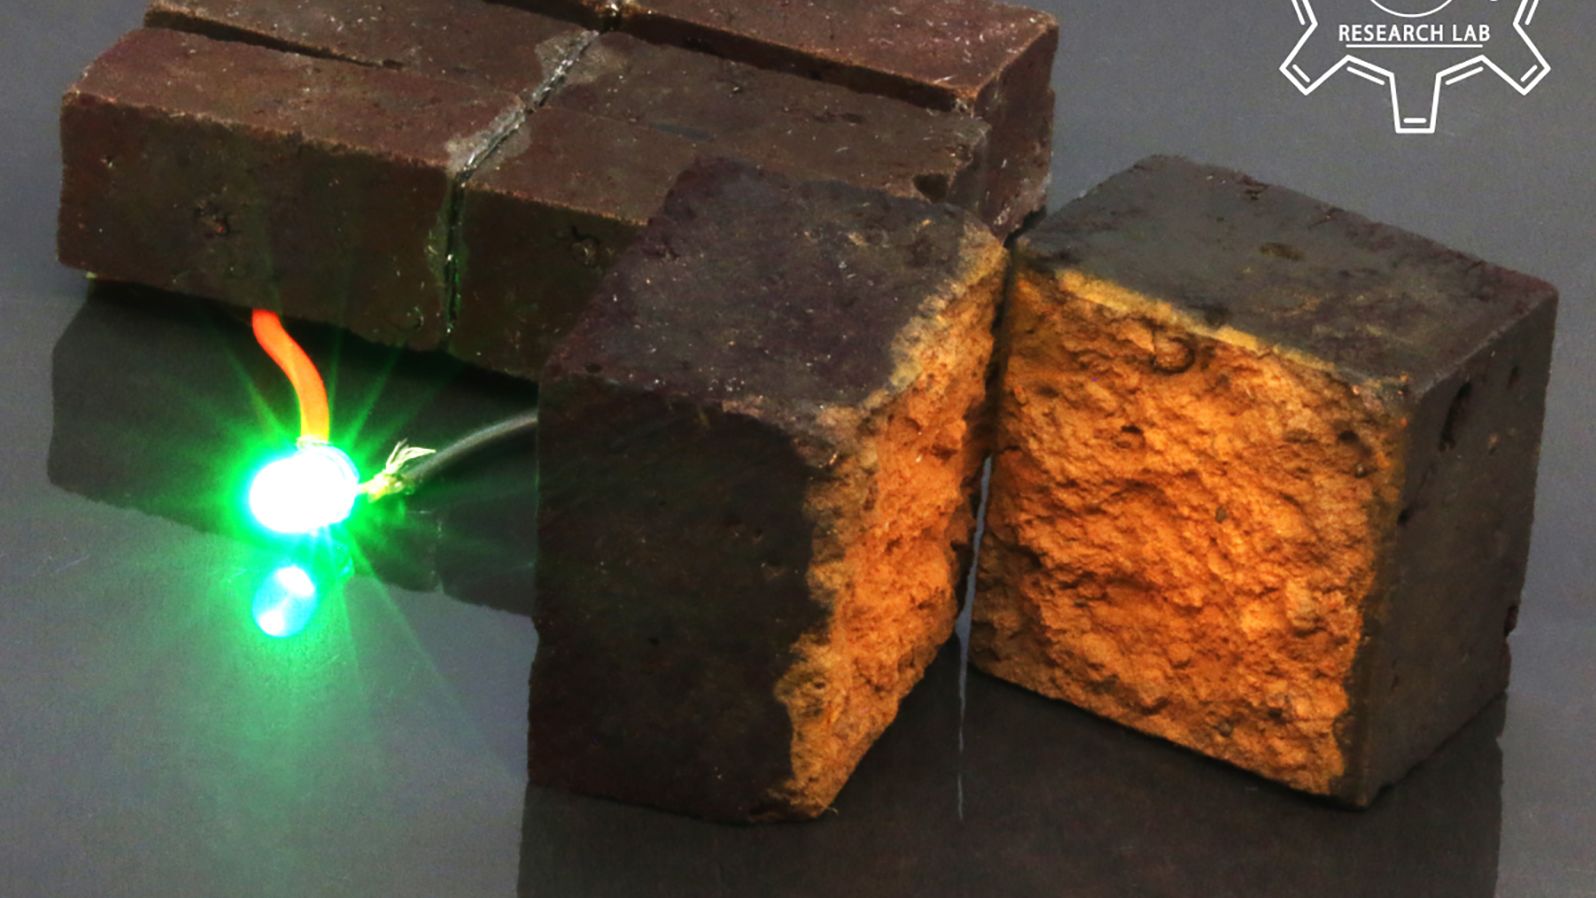 Here, a conventional brick has been transformed into an energy storage device that can power an LED light.